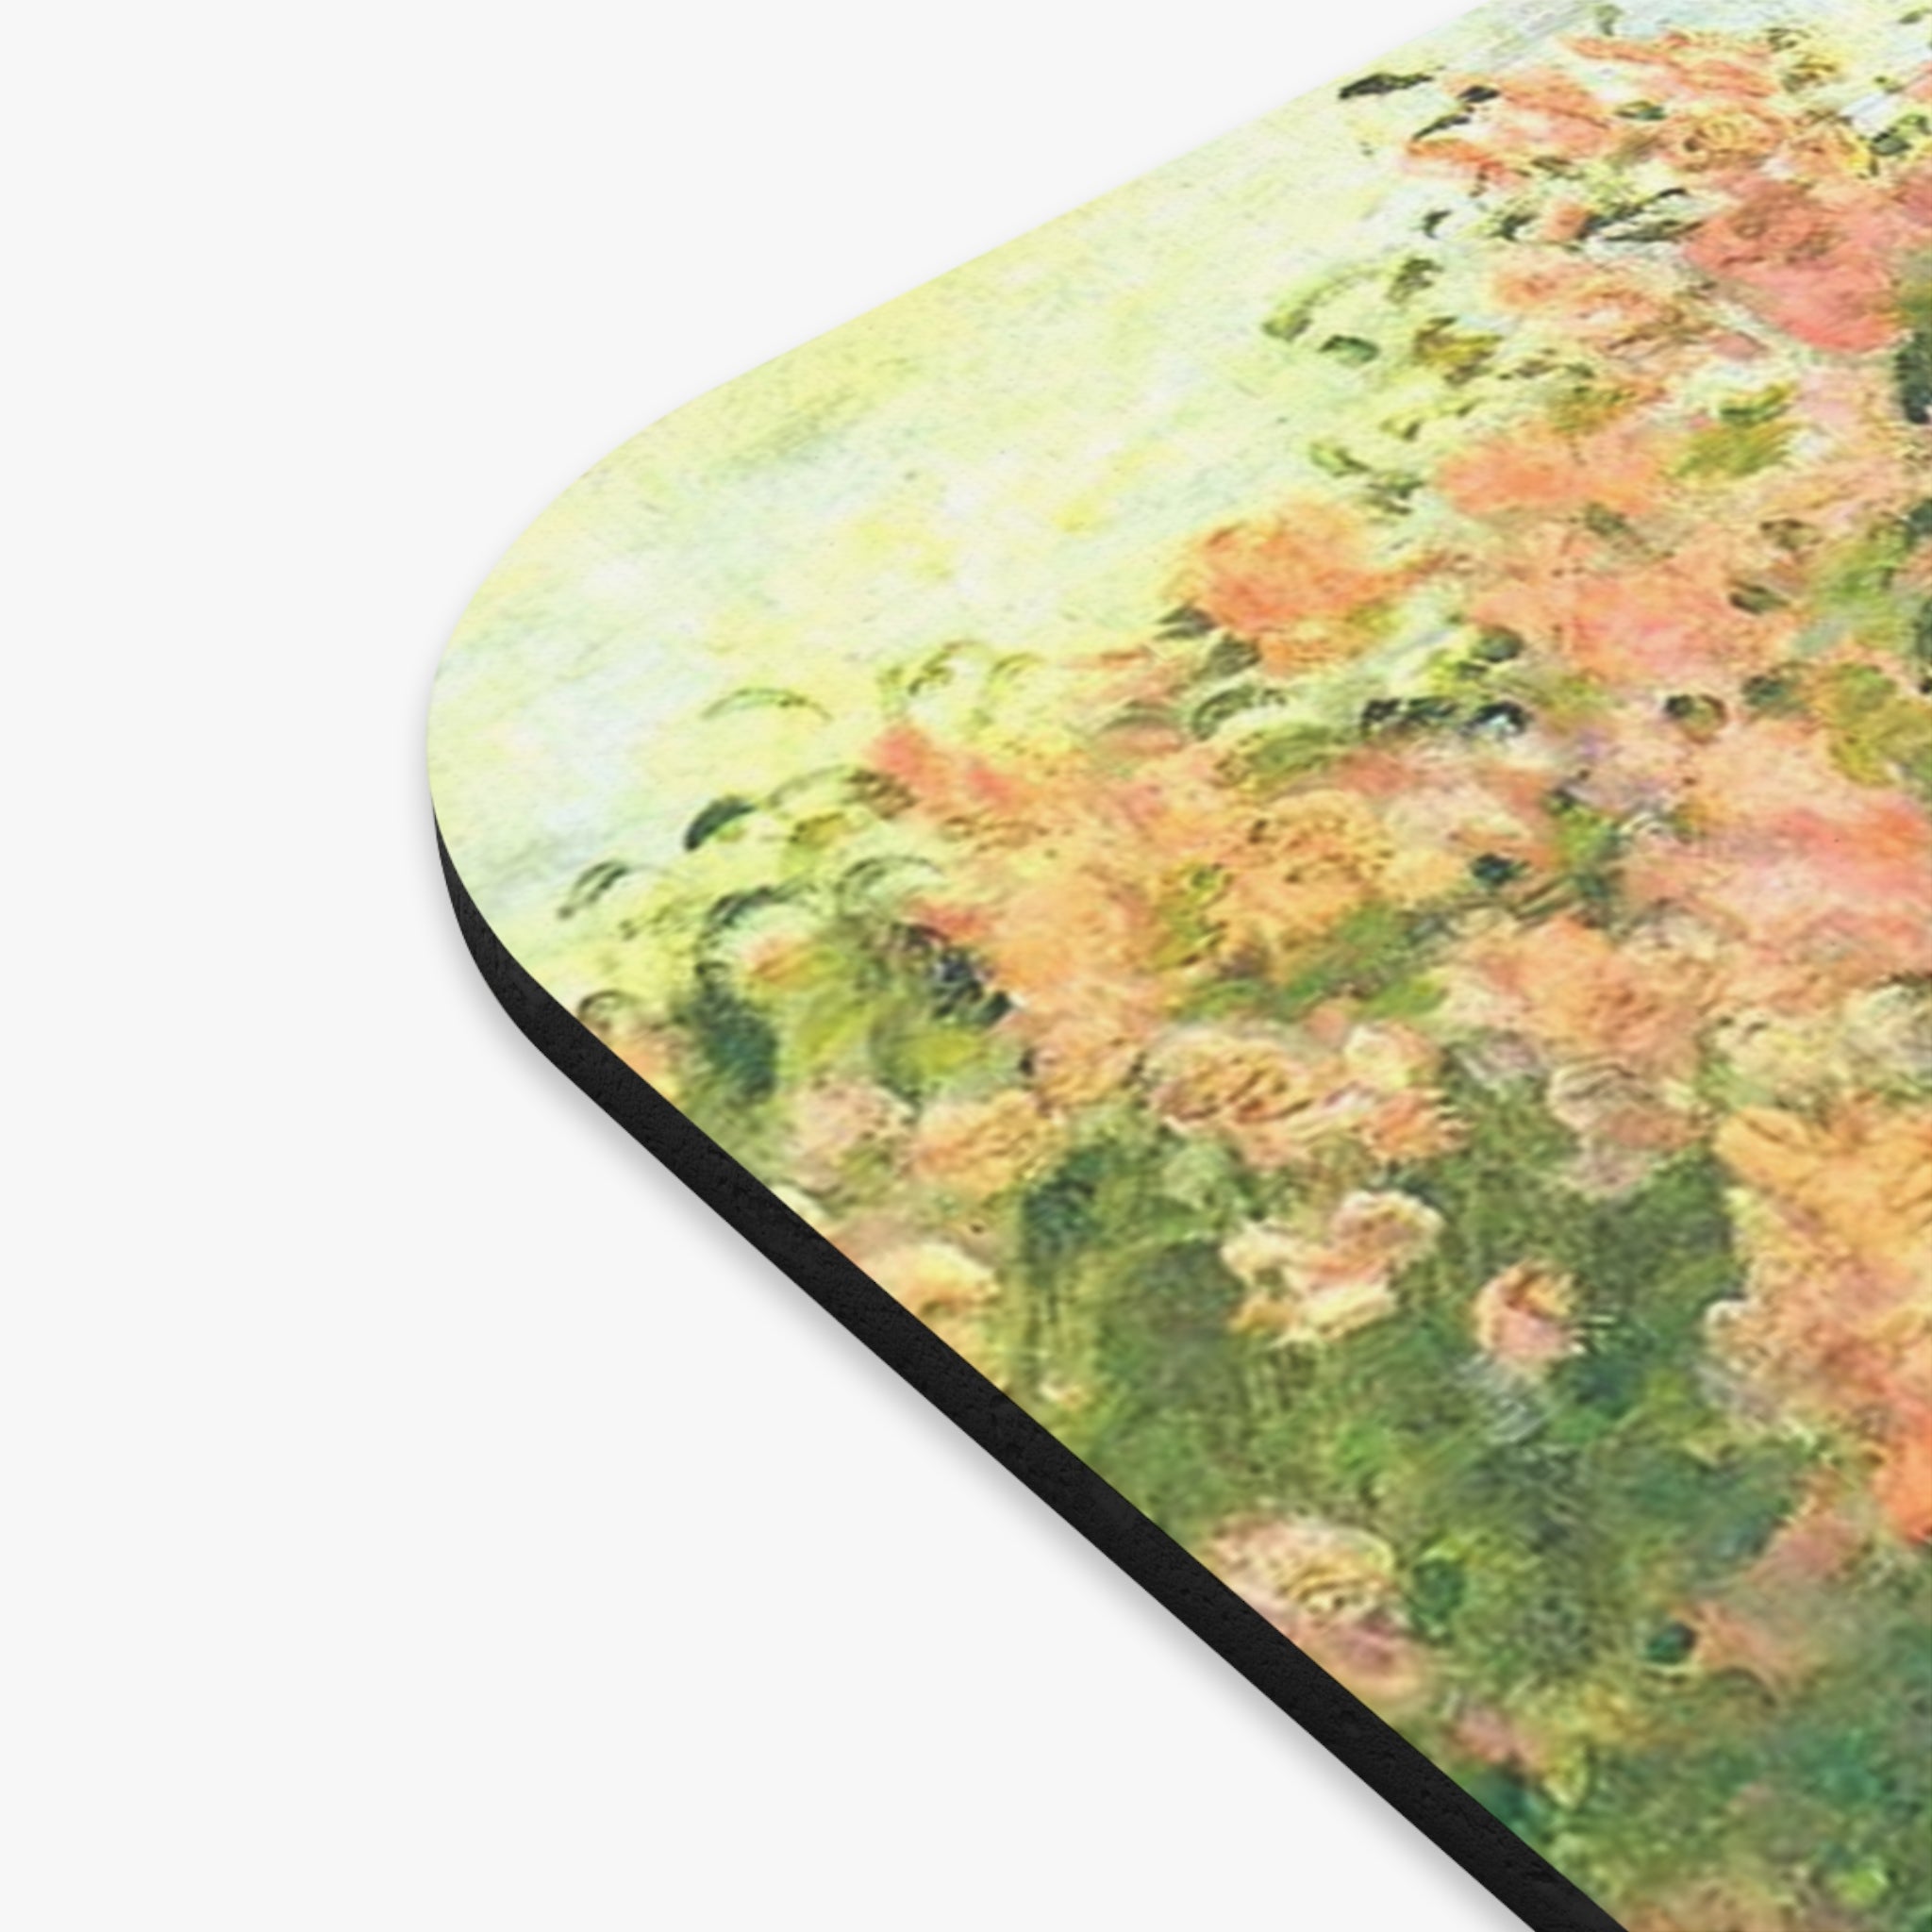 Lilacs in the Sun - Claude Monet - Mouse pad  (Rectangle)